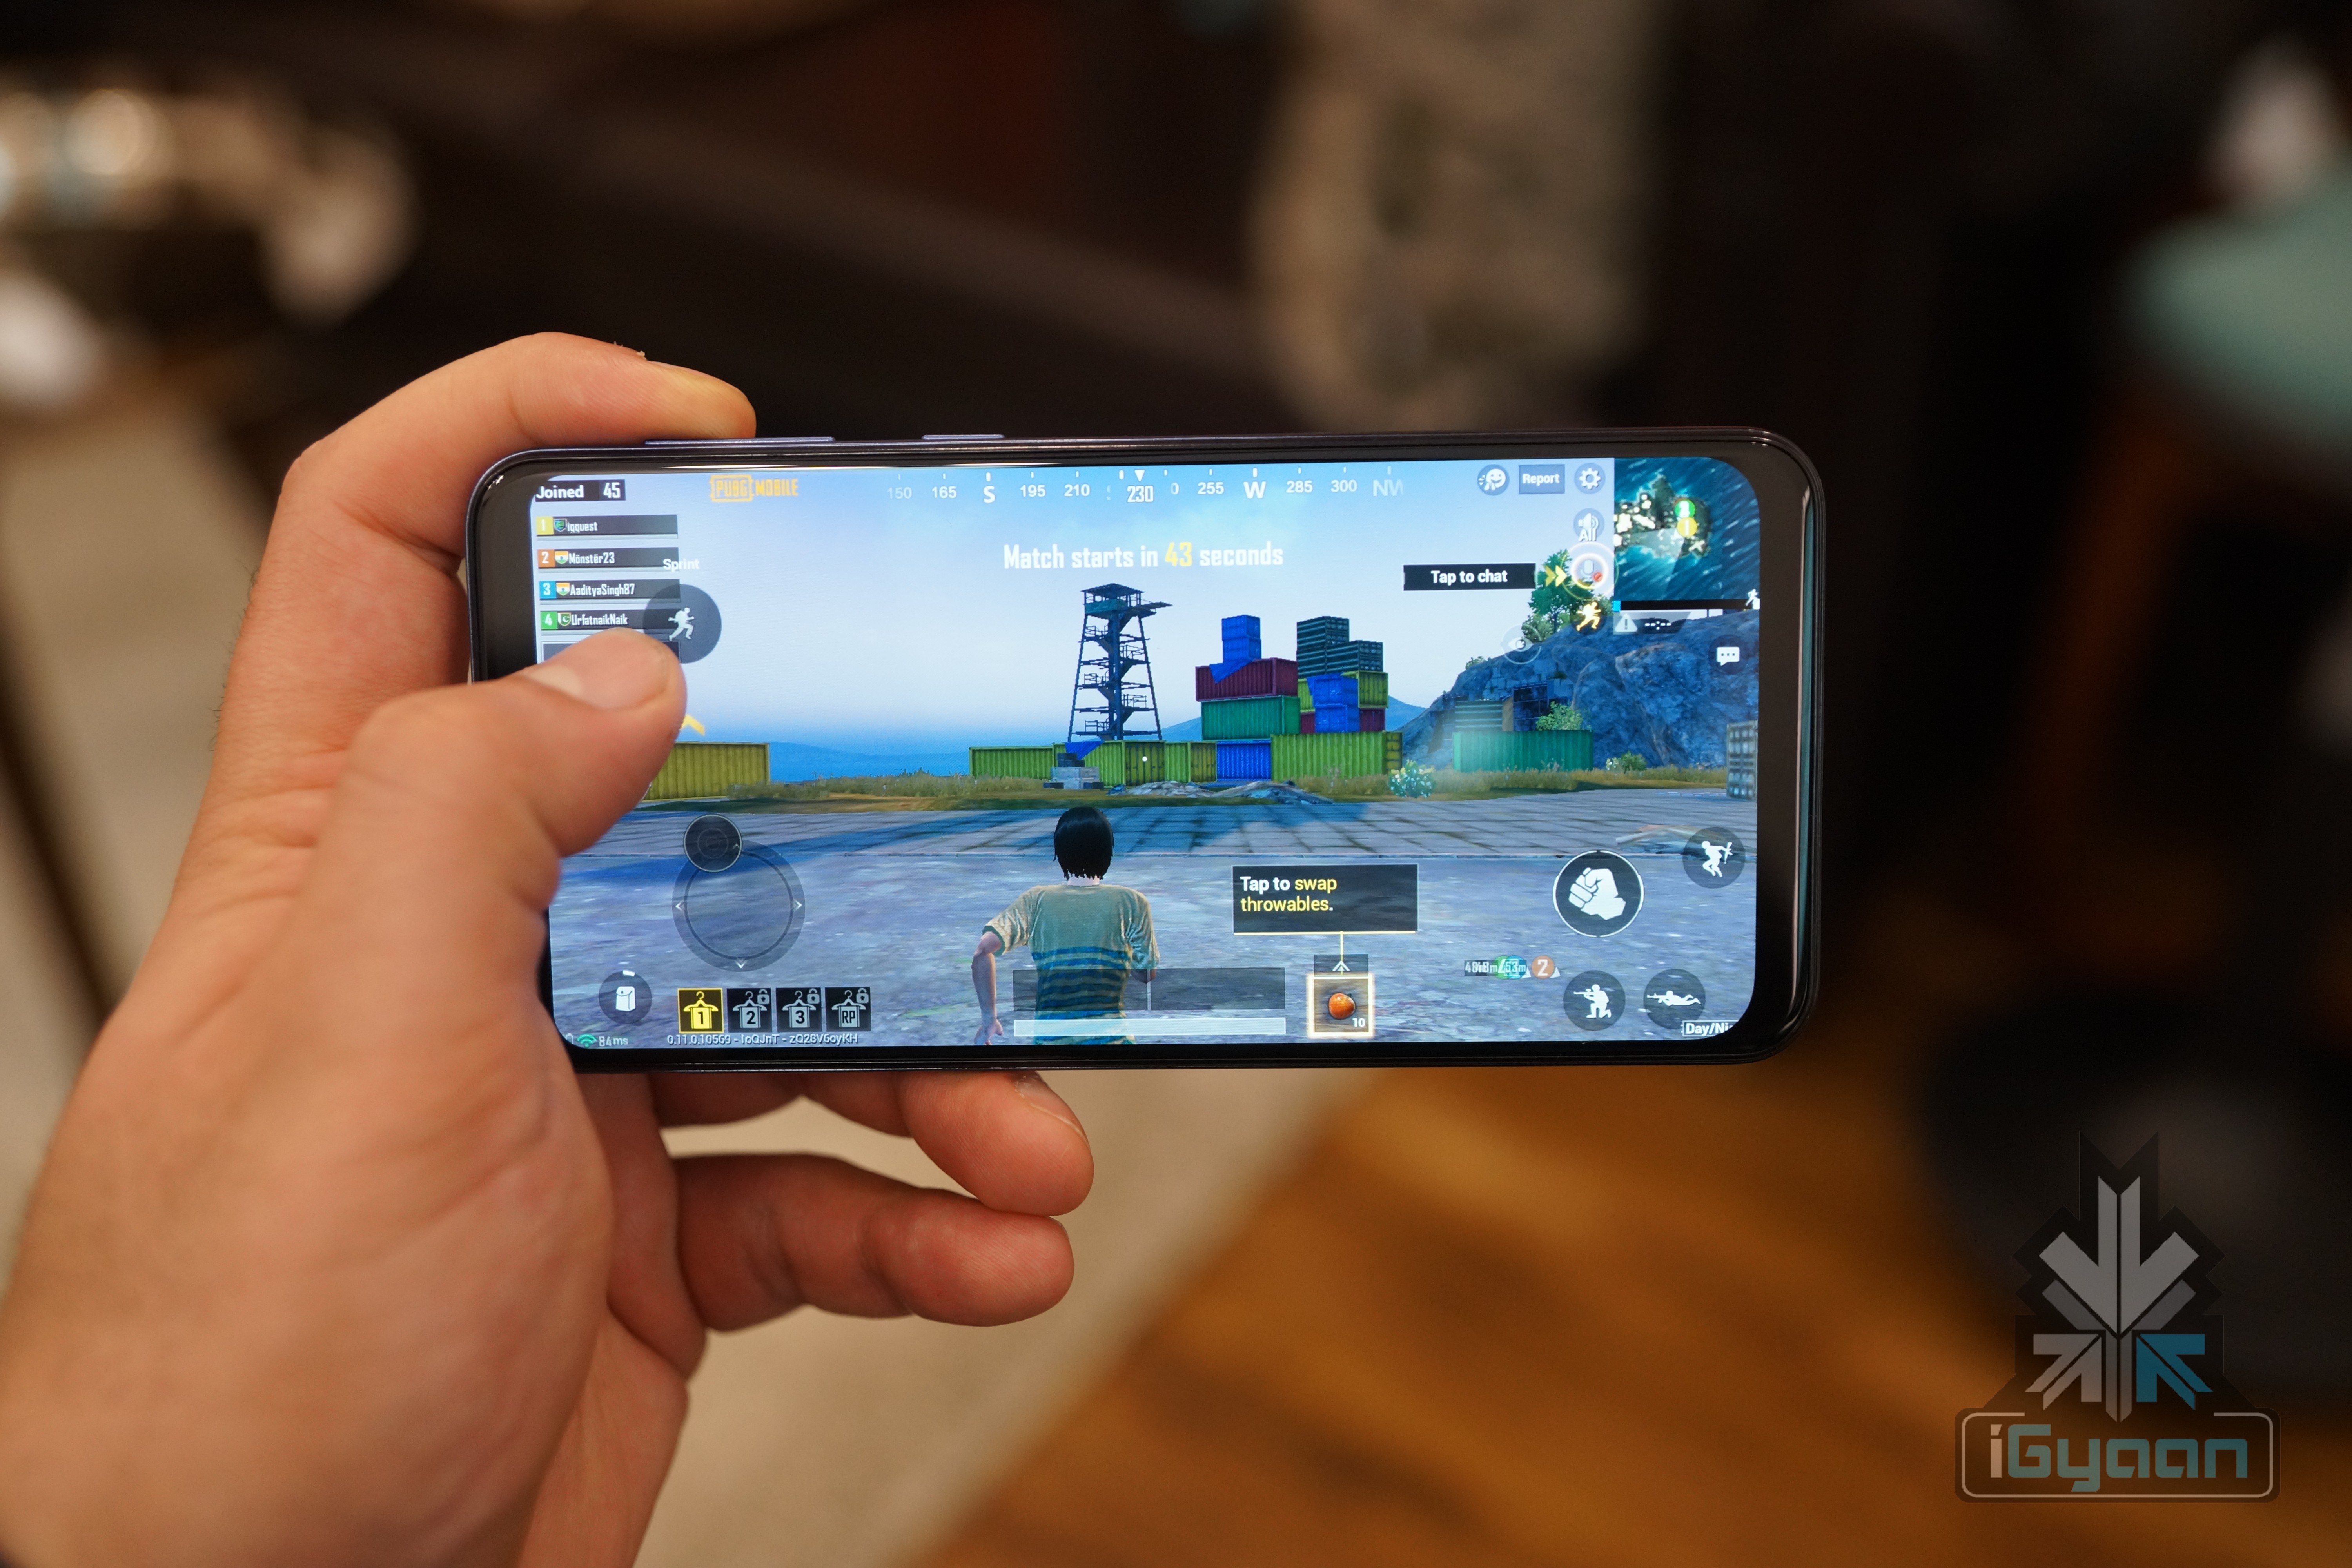 5 best online games like PUBG Mobile and Free Fire that can run on